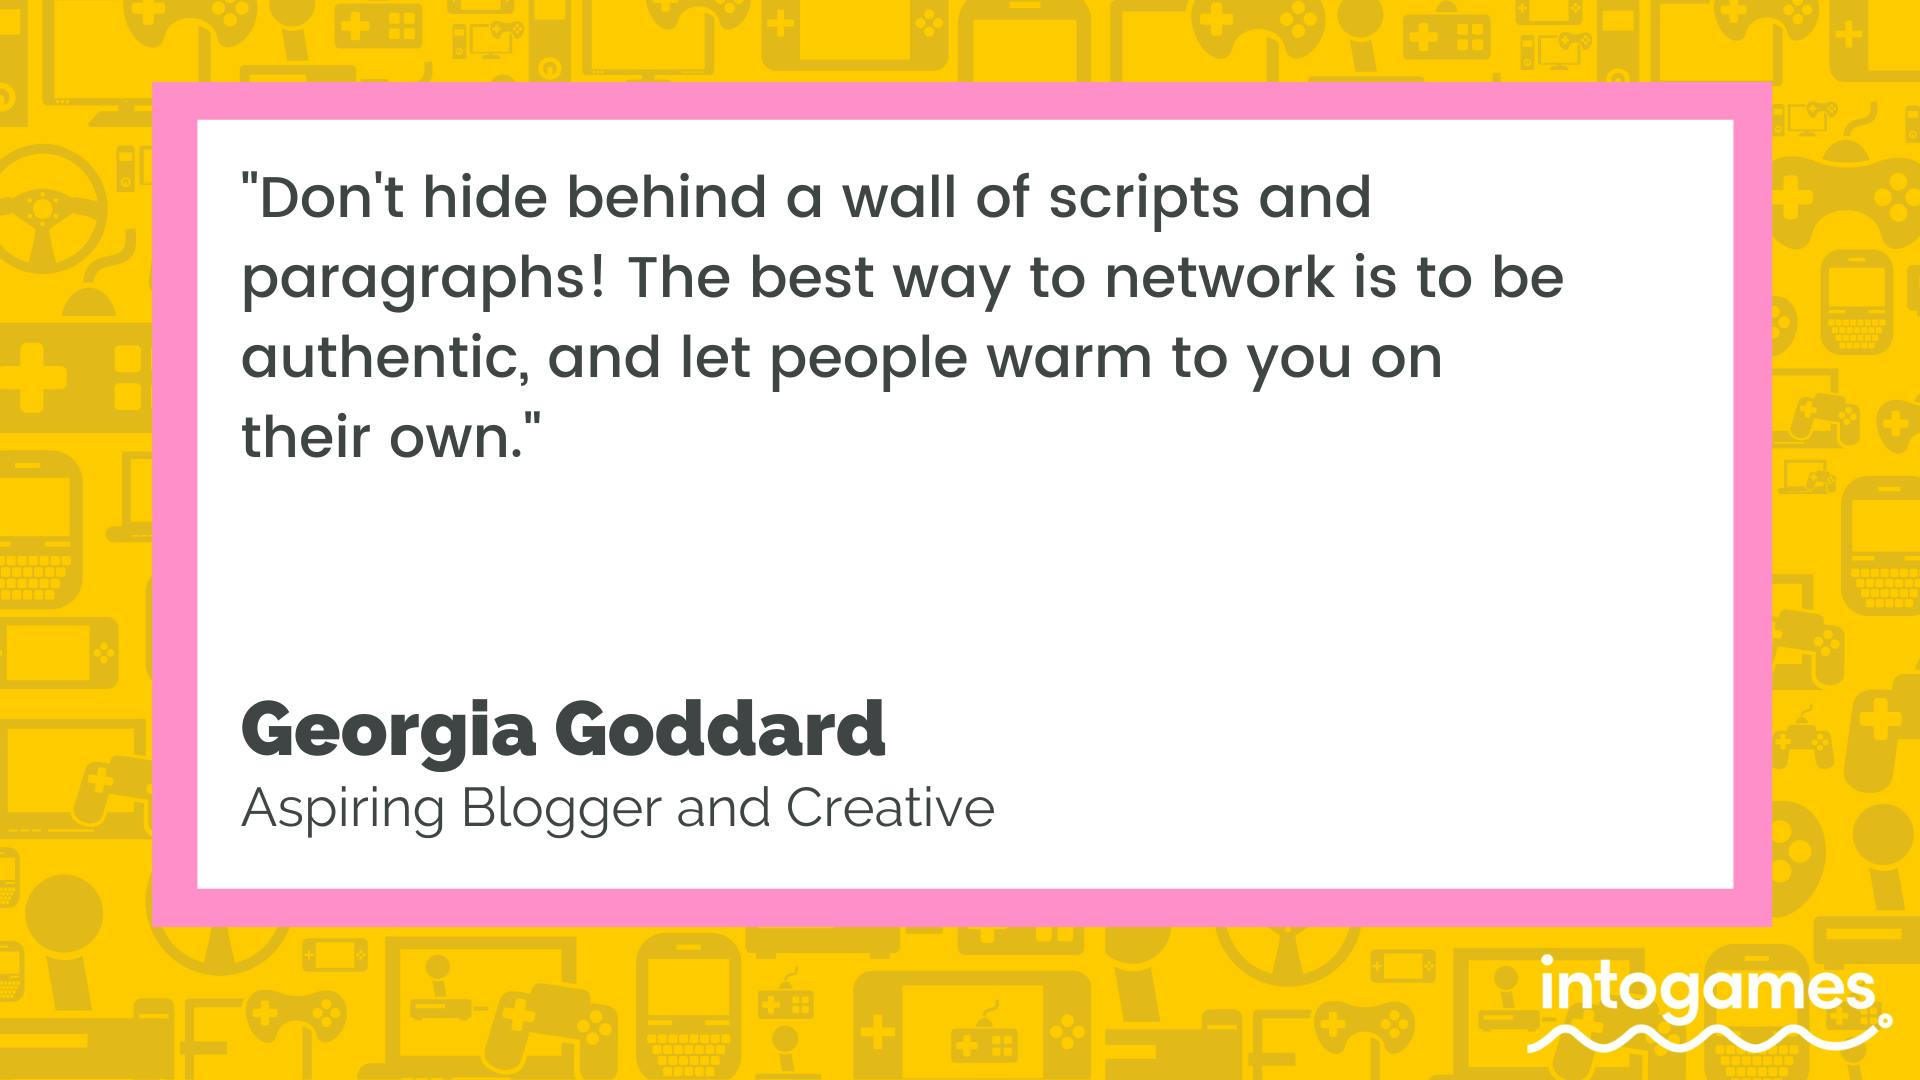 "Don't hide behind a wall of scripts and paragraphs! The best way to network is to be authentic, and let people warm to you on their own." - Georgia Goddard, Aspiring Blogger and Creative.